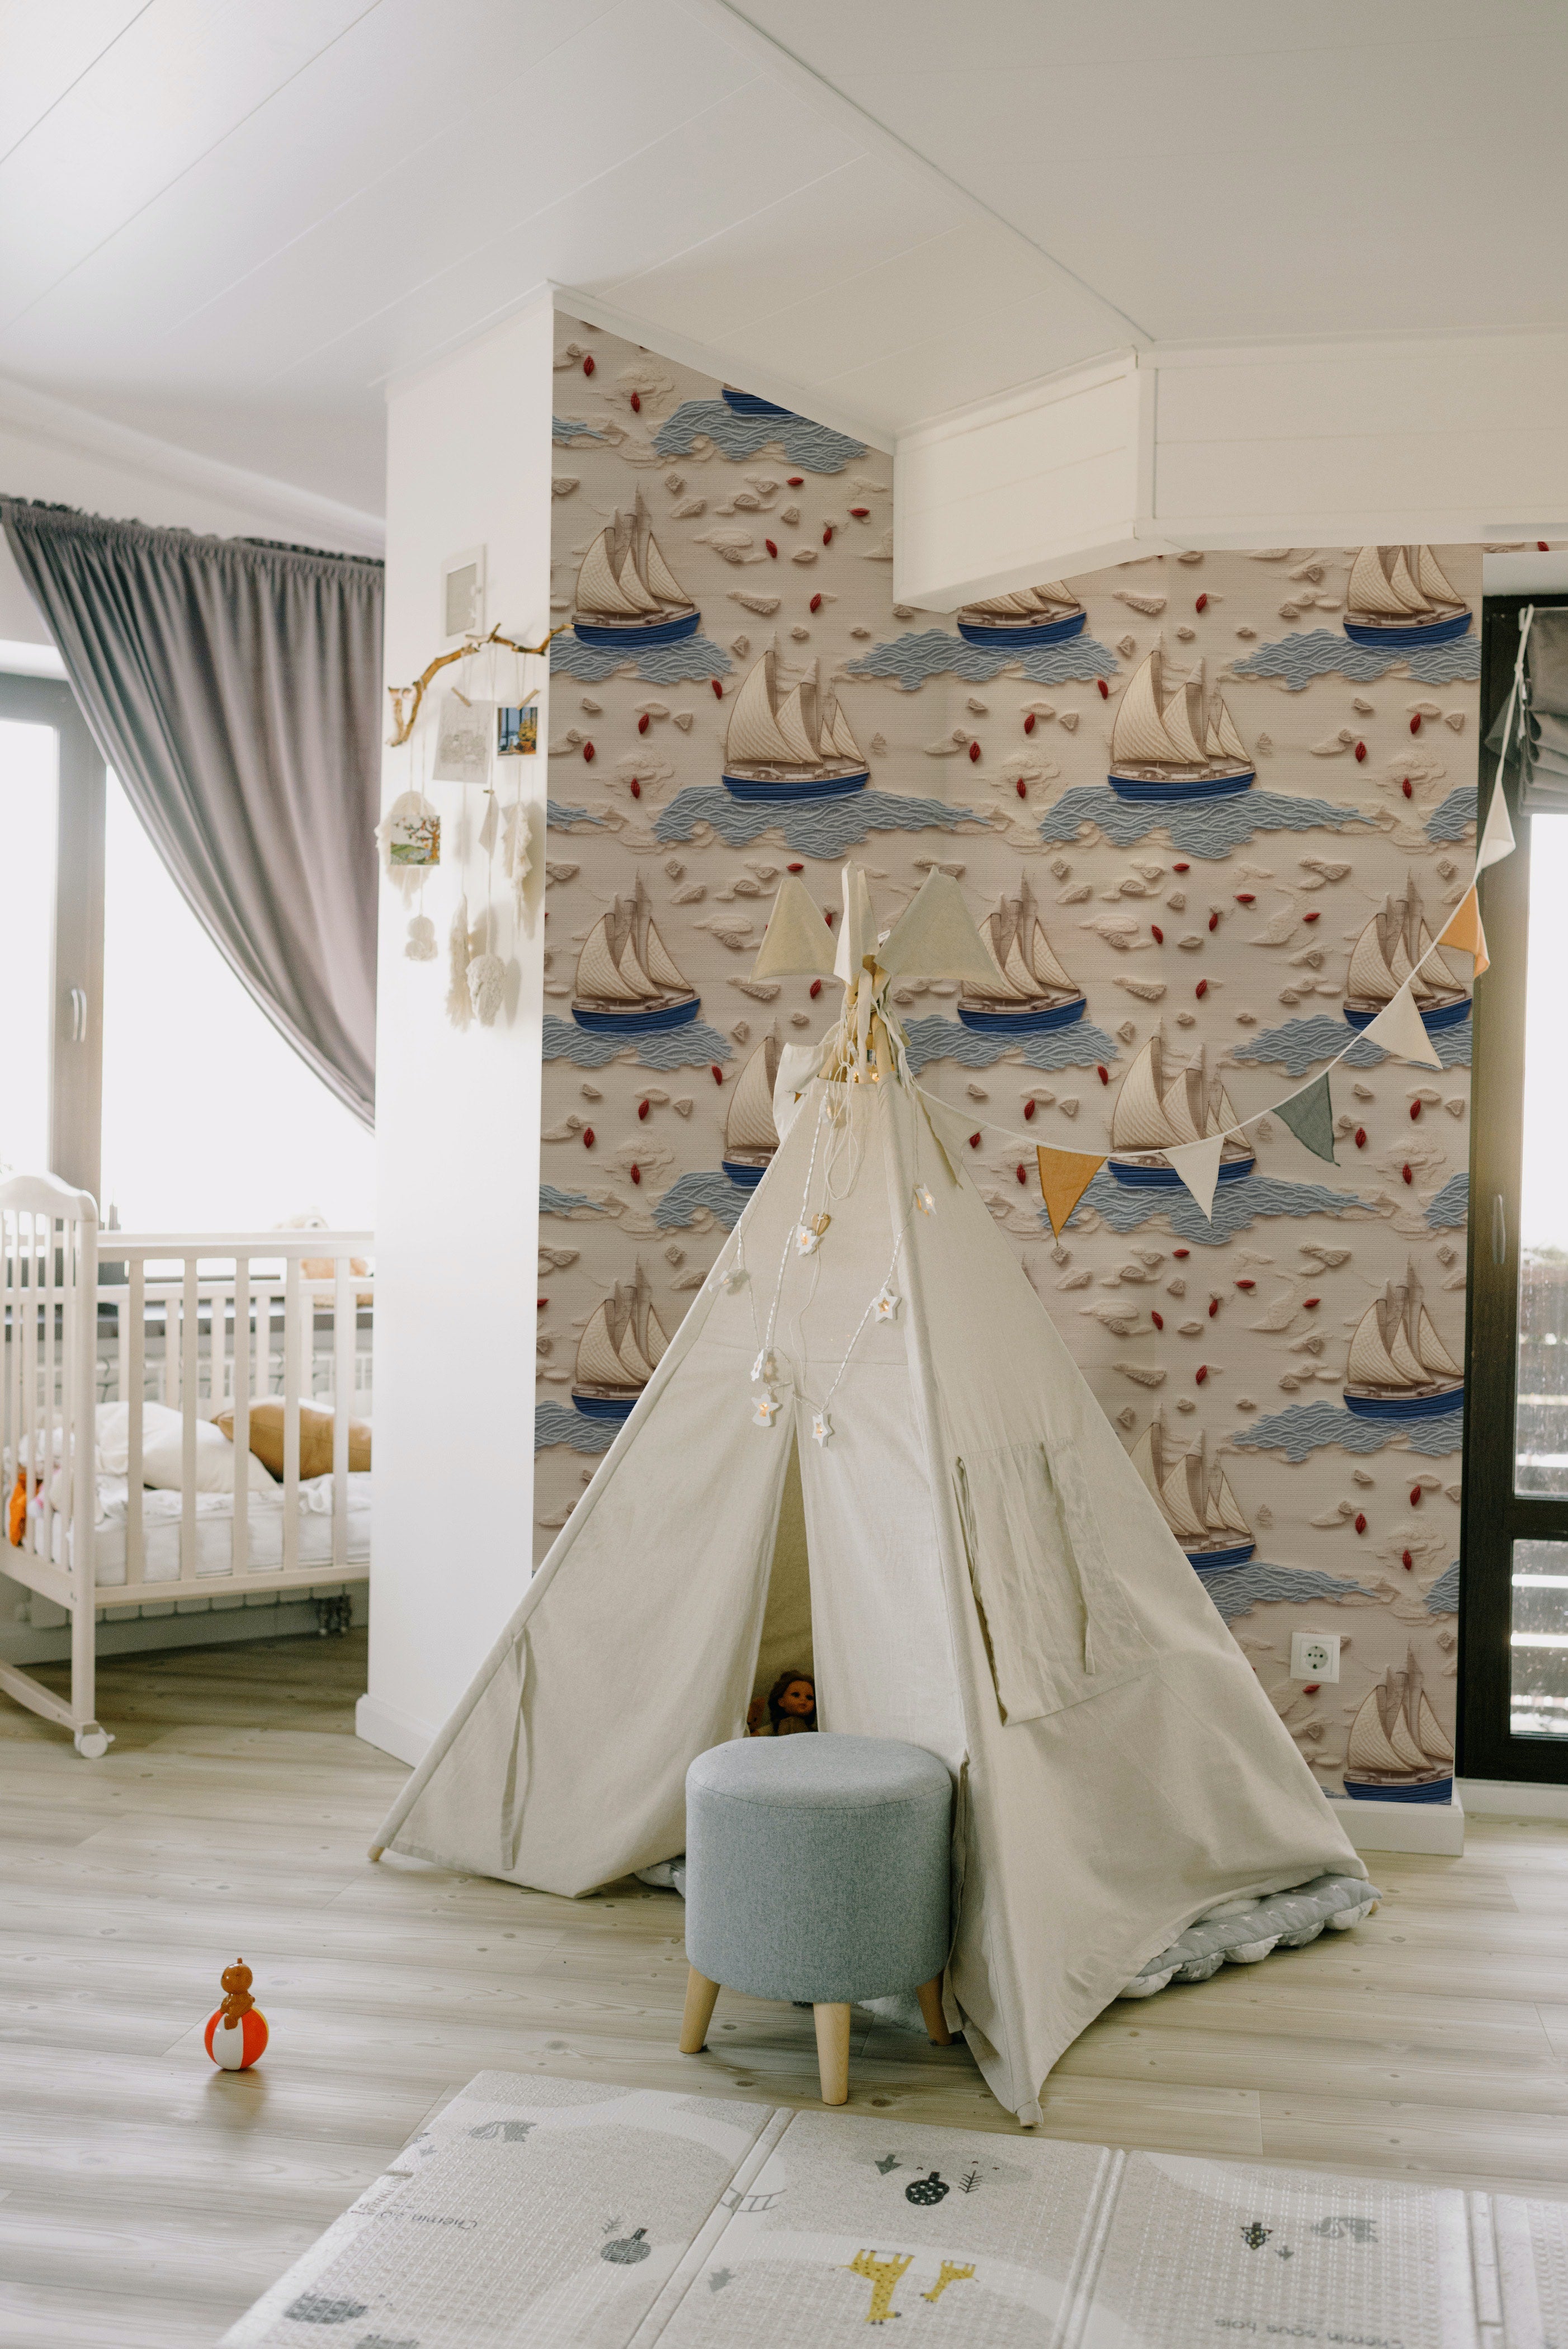 A child's playroom with Coastal Charm Wallpaper, creating a delightful nautical scene with its array of sailboats and gentle waves, complemented by a playful tent and a cozy interior setting.